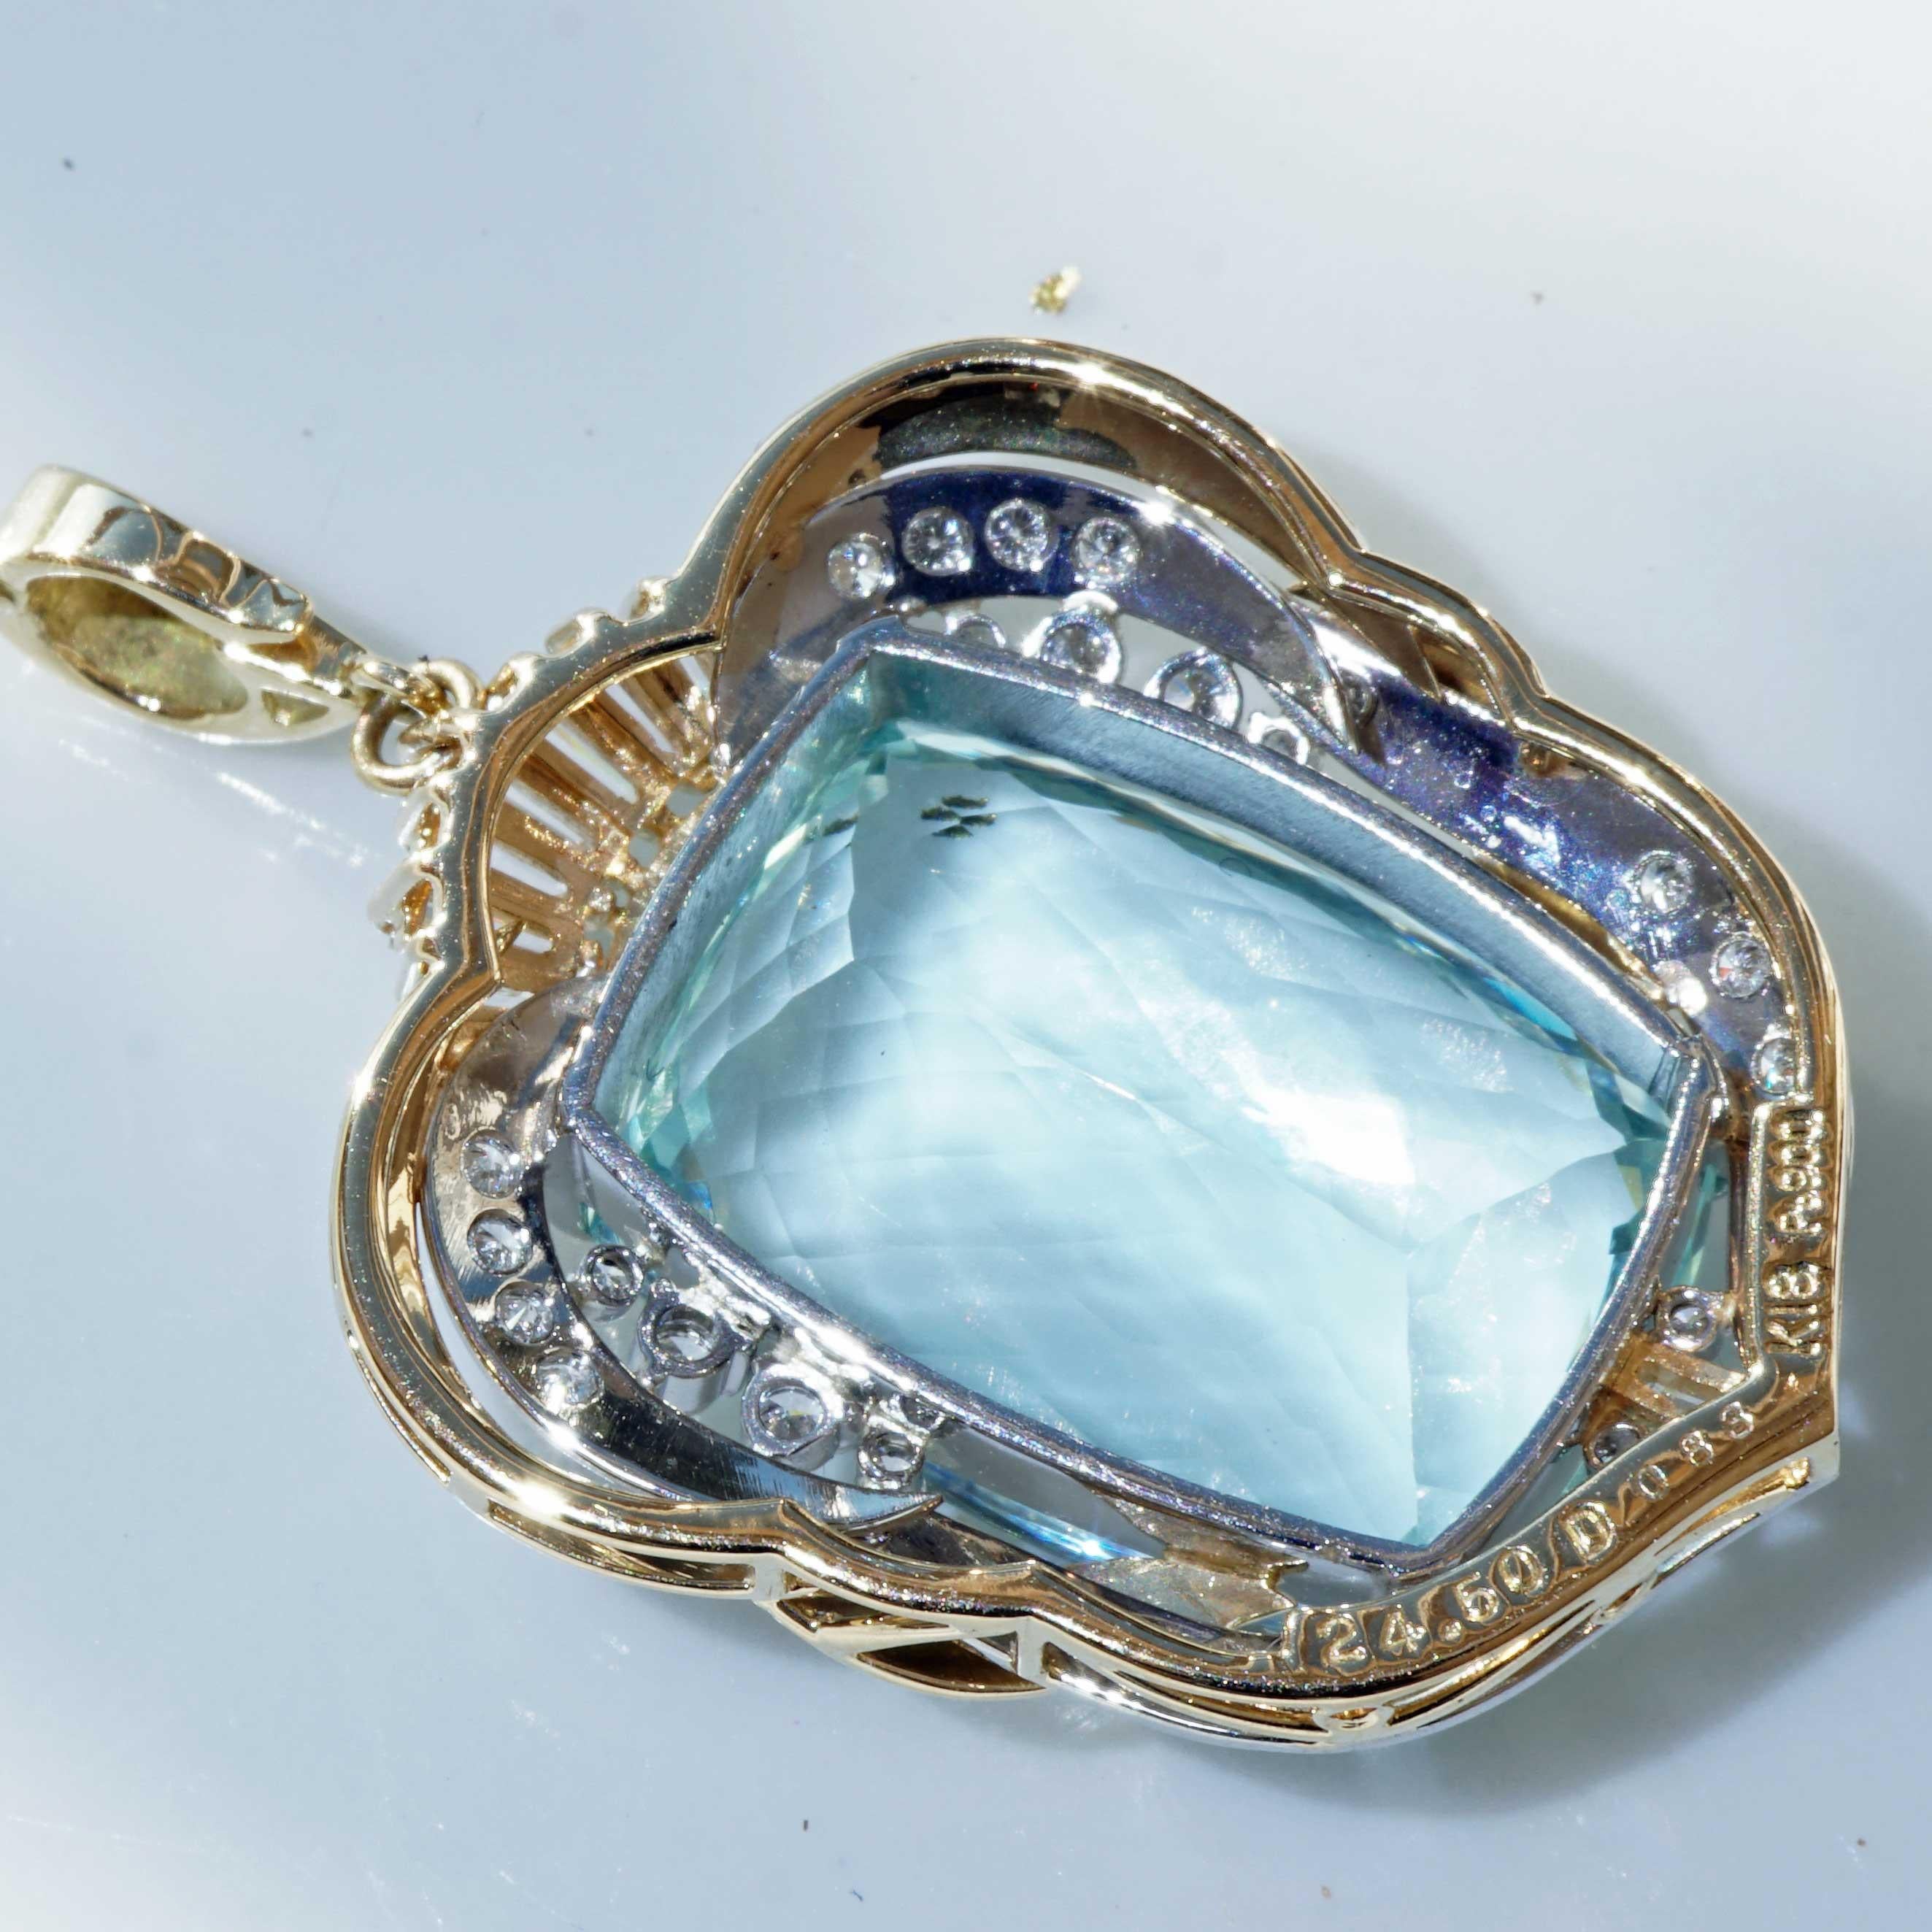 Modern Aquamarine Brilliant Clip Pendant 24.5 0.83 ct this Color is rare and demanded For Sale